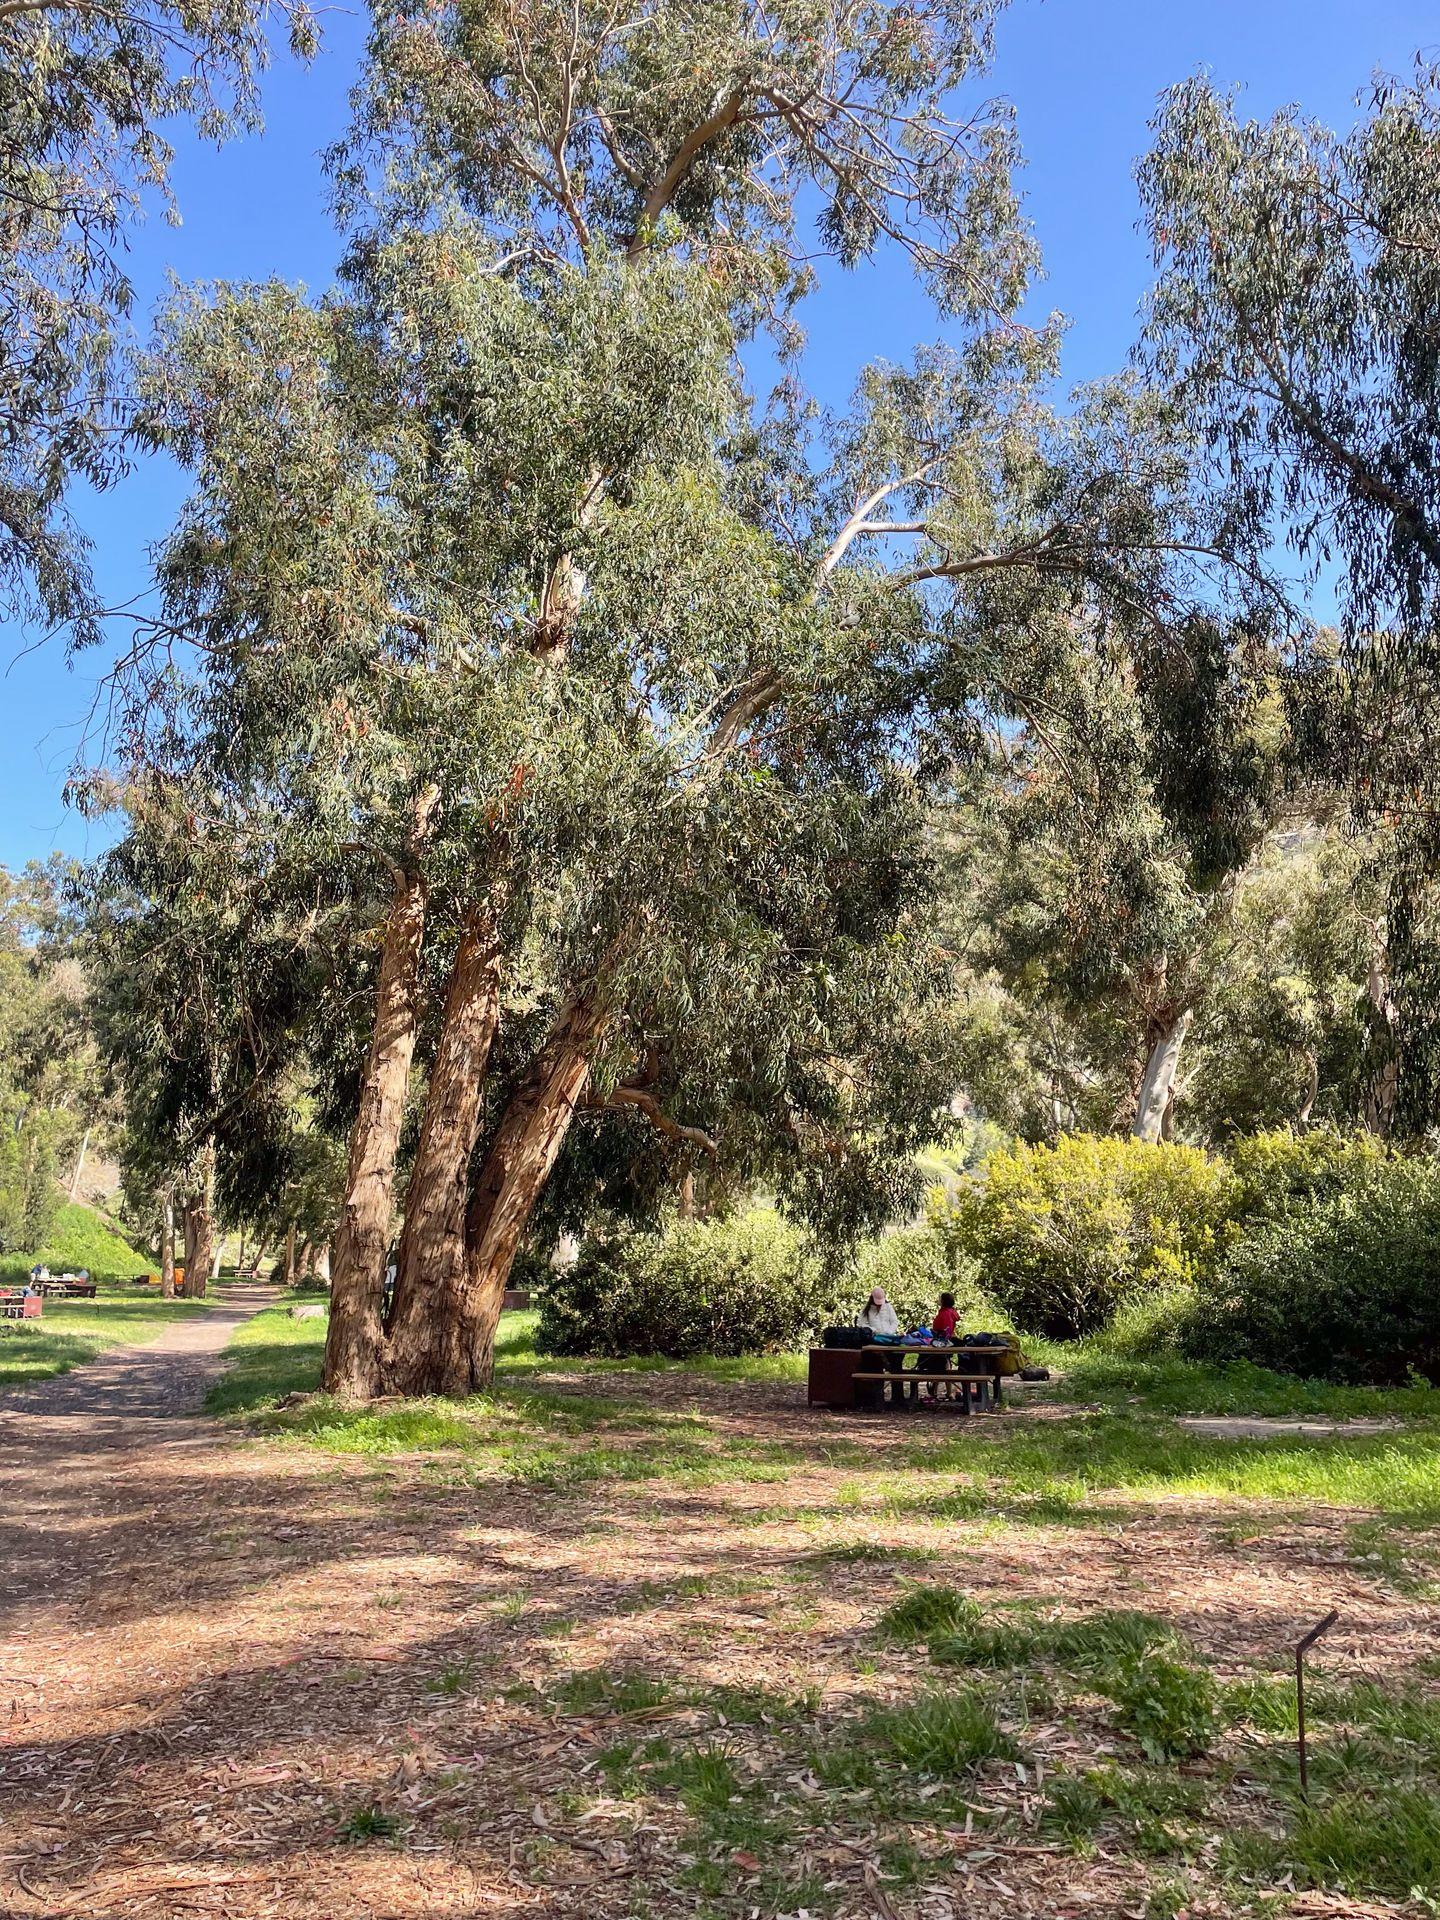 A campsite at Scorpion Canyon. There is a picnic table with a tall tree above it.